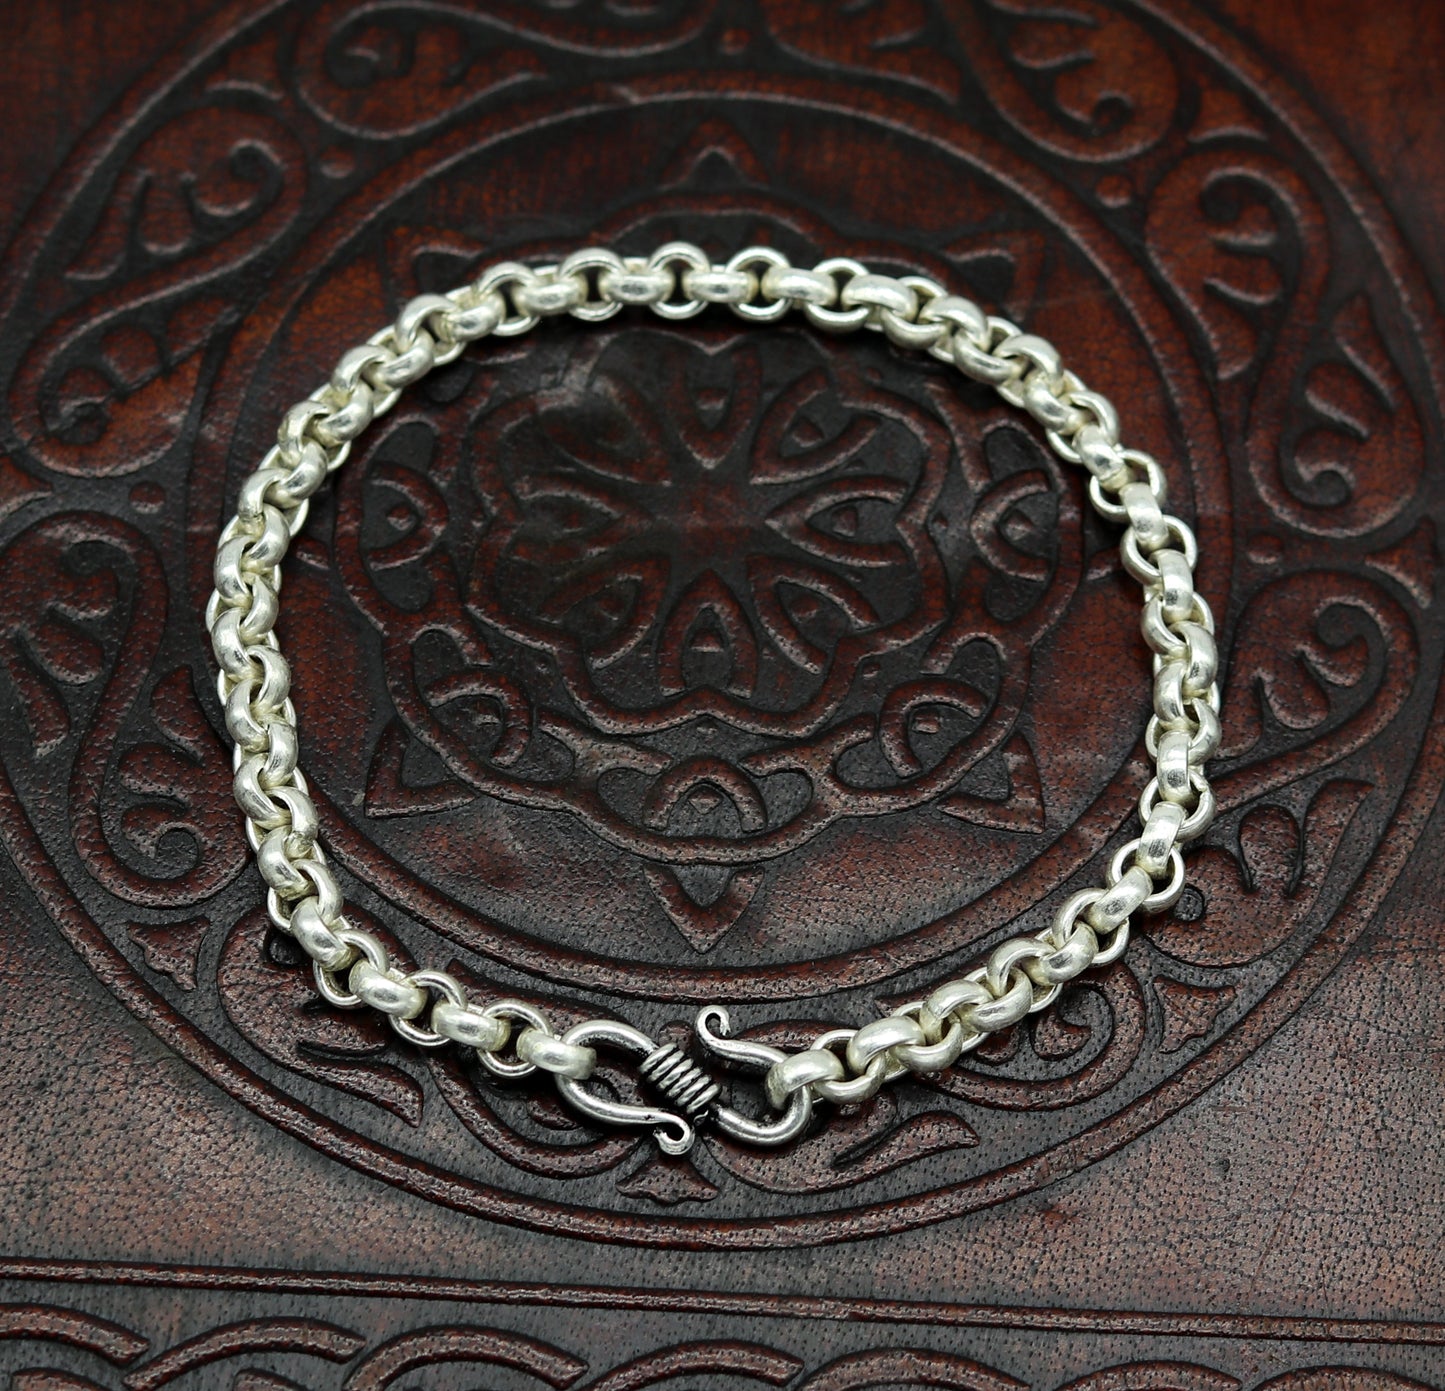 7.5" 925 sterling silver handmade customized solid rolo chain bracelet, stylish link bracelet unisex gifting belly dance jewelry nsbr185 - TRIBAL ORNAMENTS